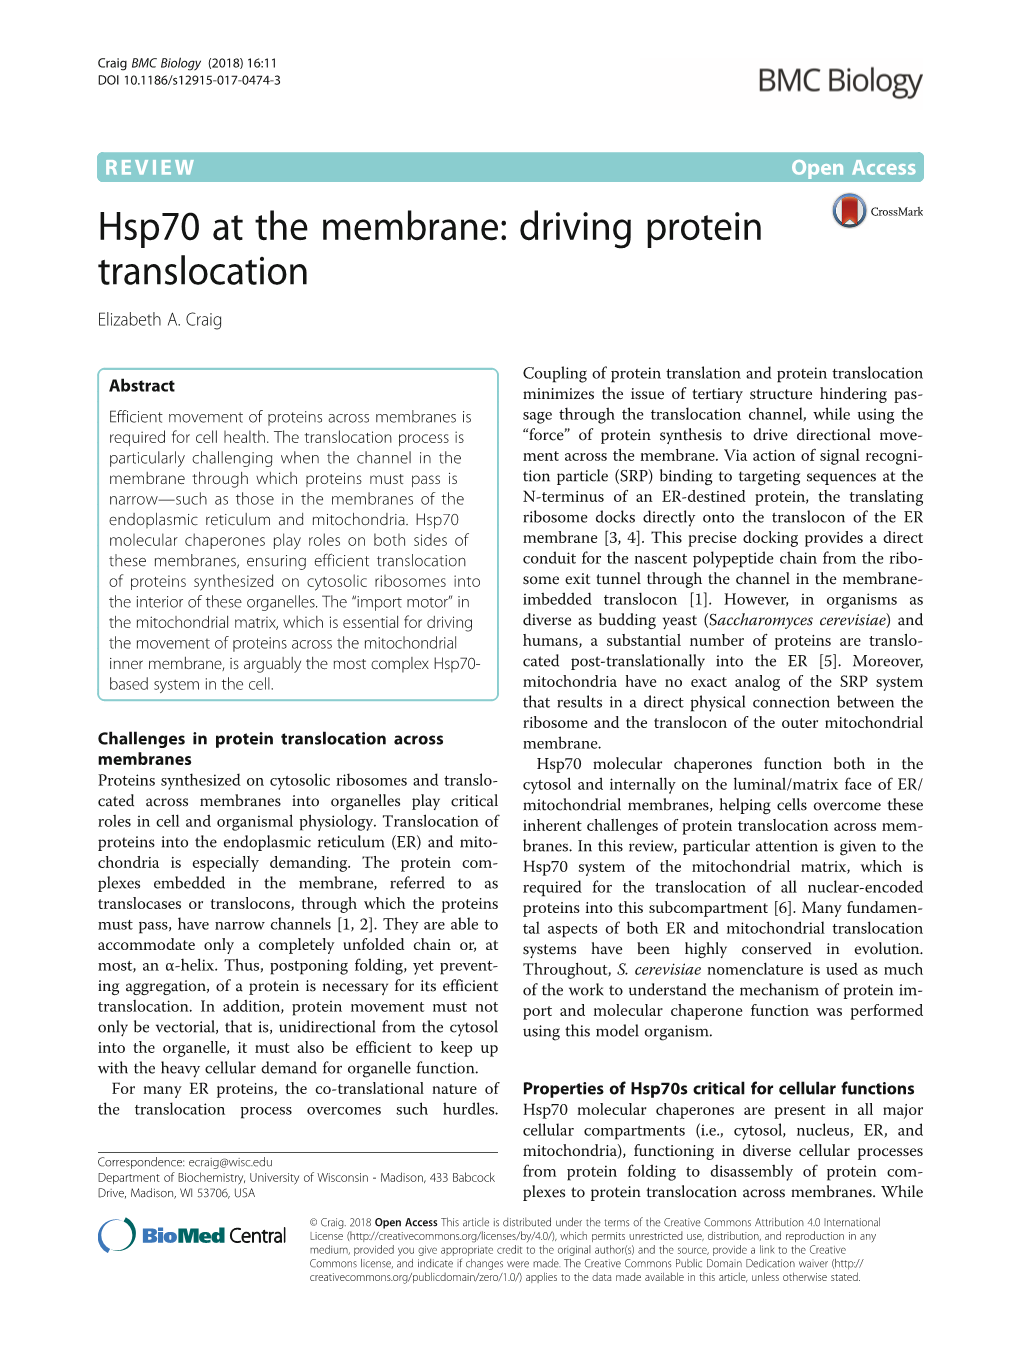 Hsp70 at the Membrane: Driving Protein Translocation Elizabeth A